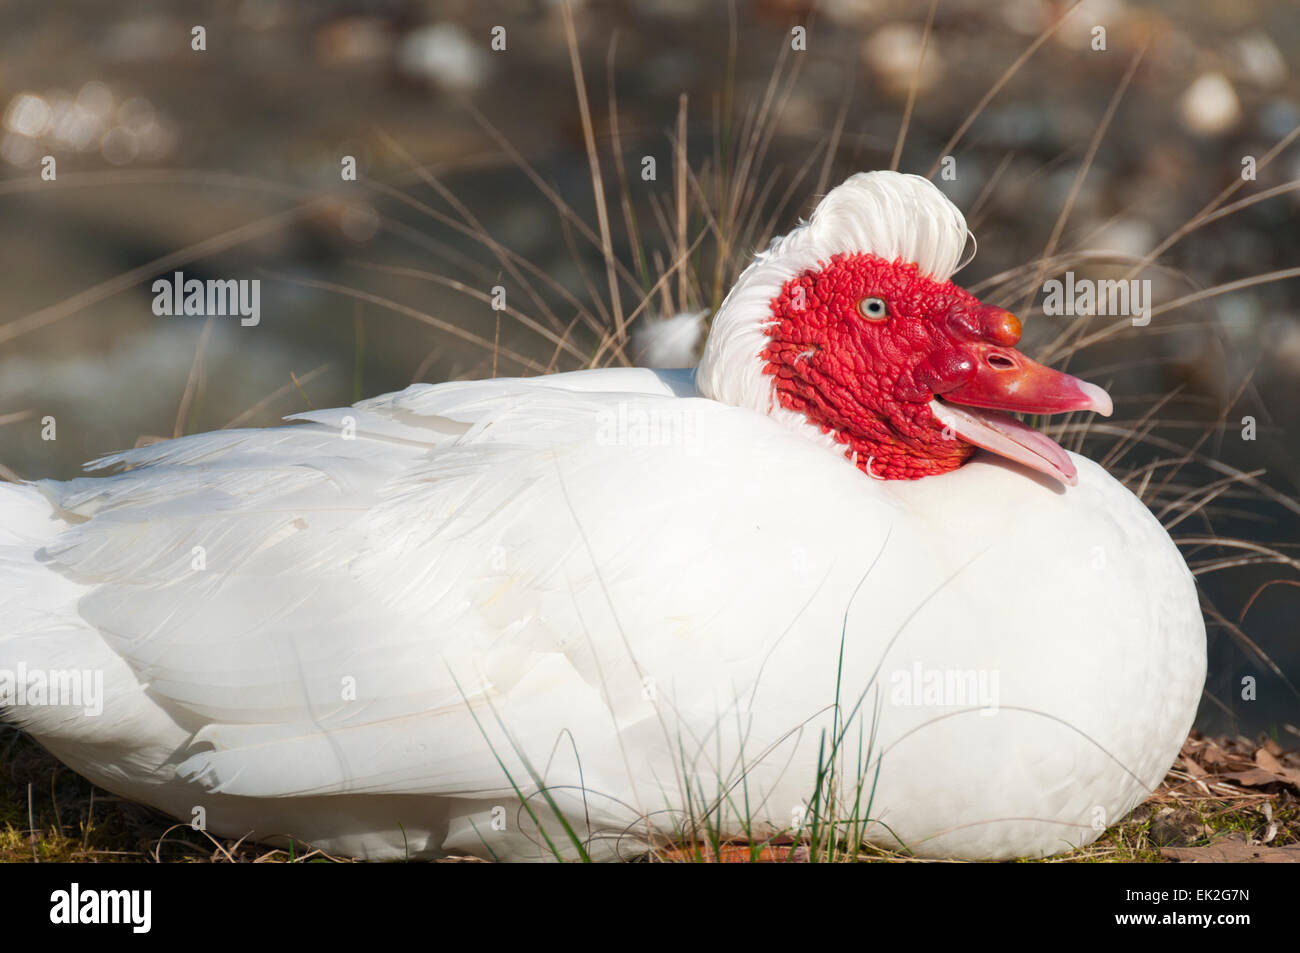 A white Muscovy duck sitting on the grass with open mouth Stock Photo